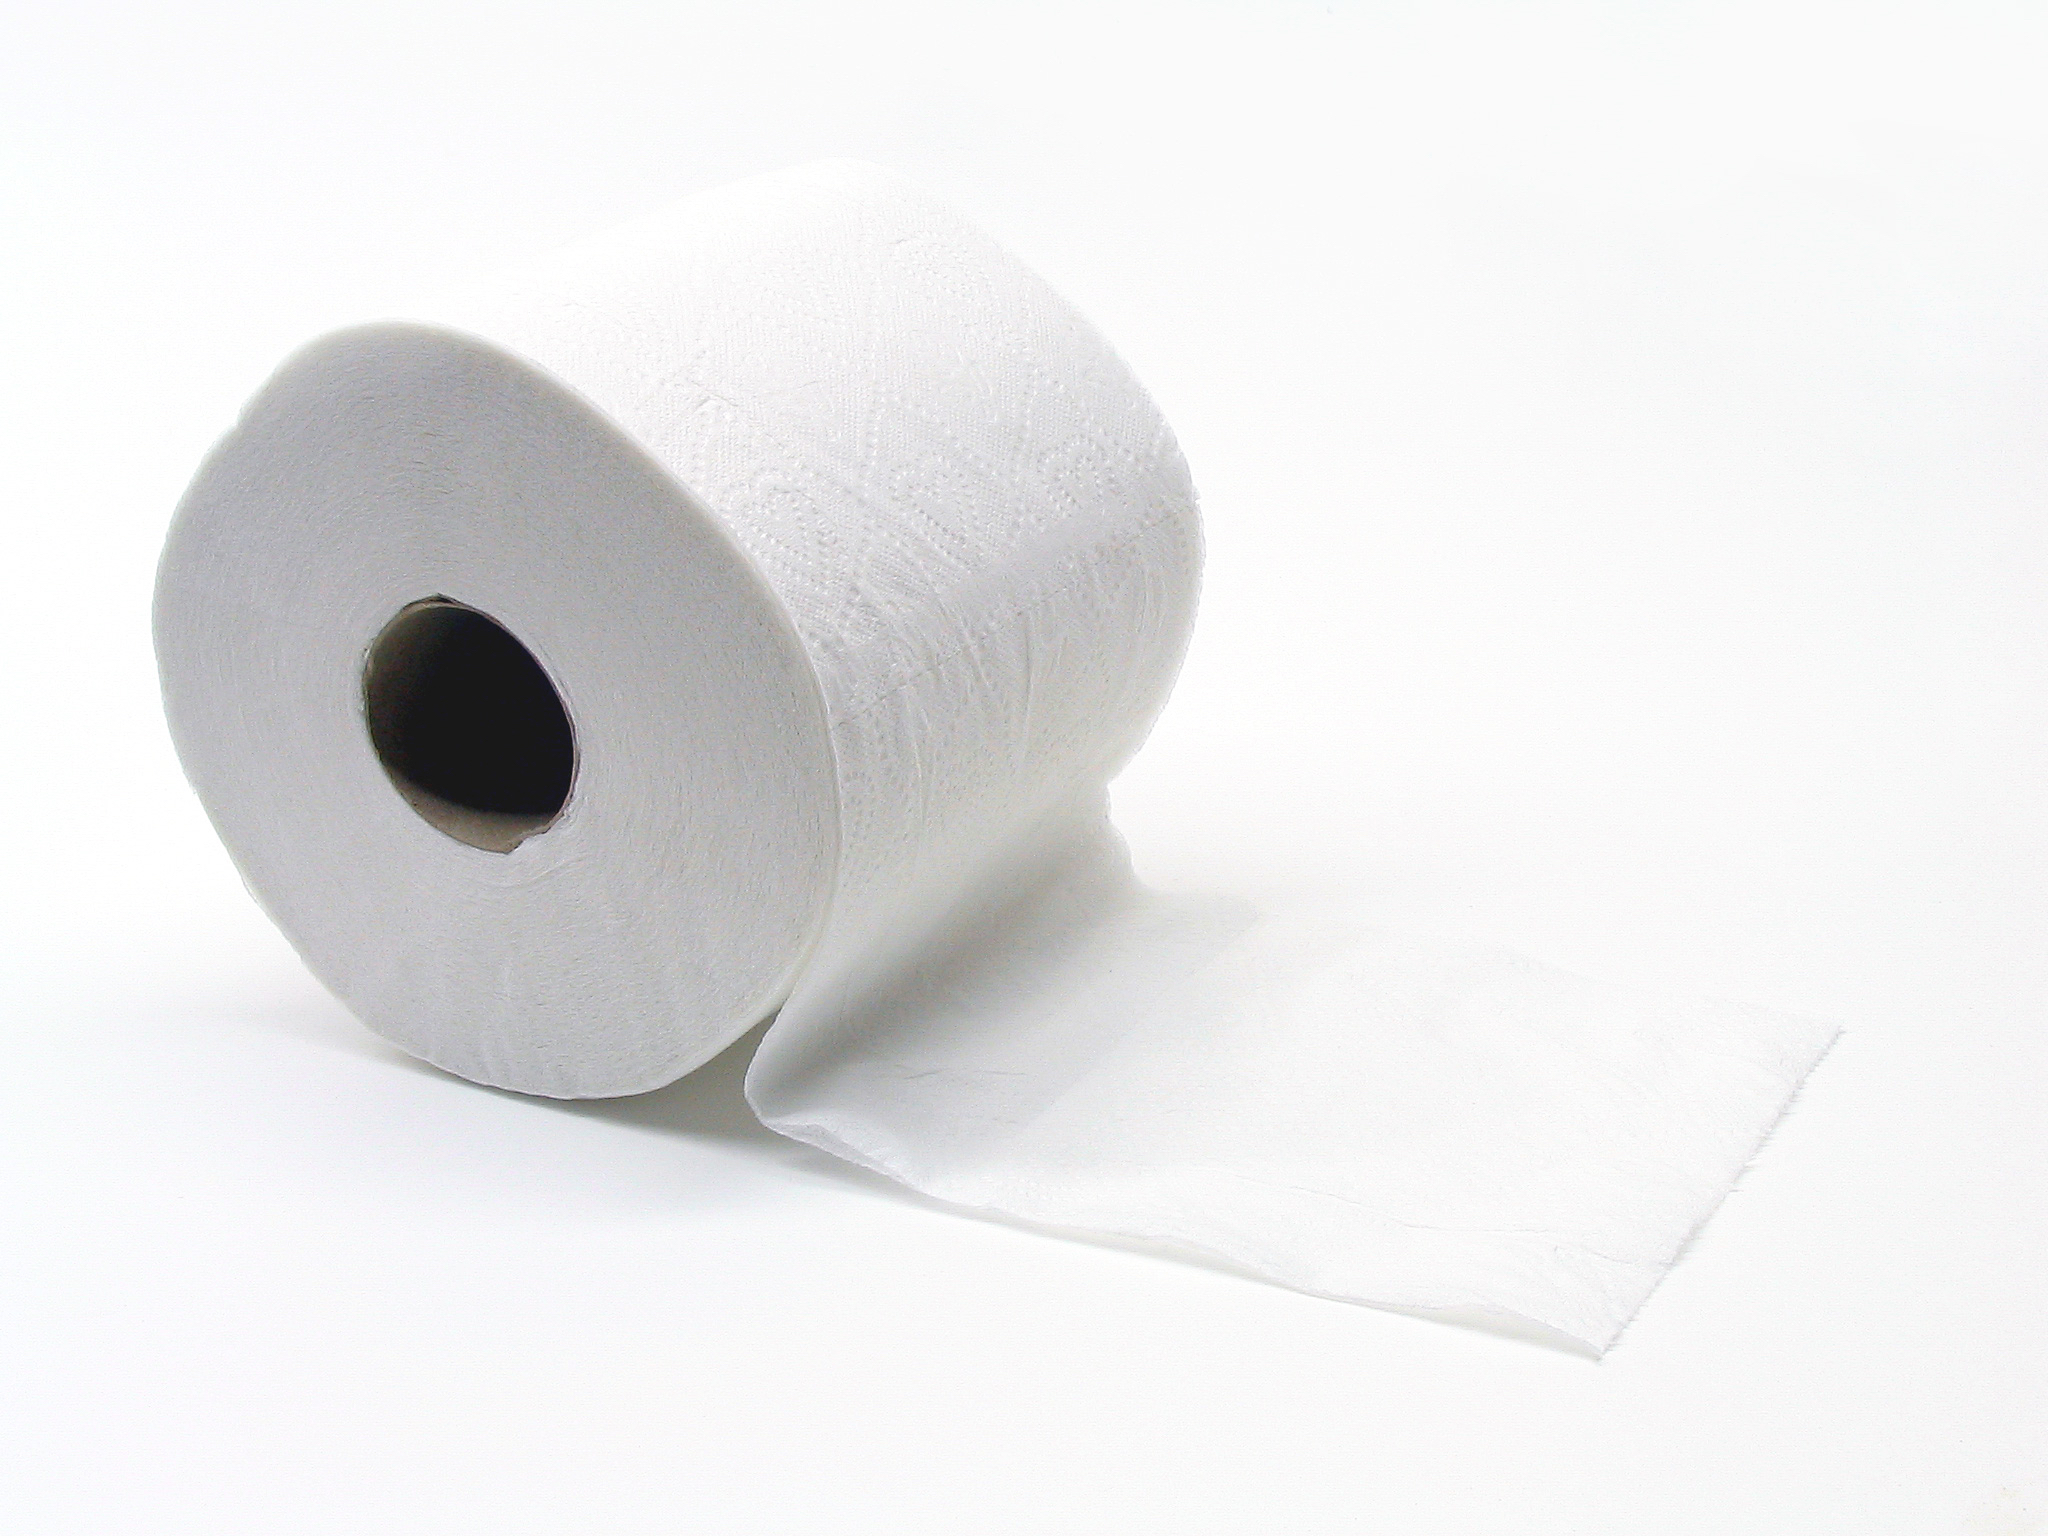 NFL team traveled to England with its own toilet paper / Boing Boing